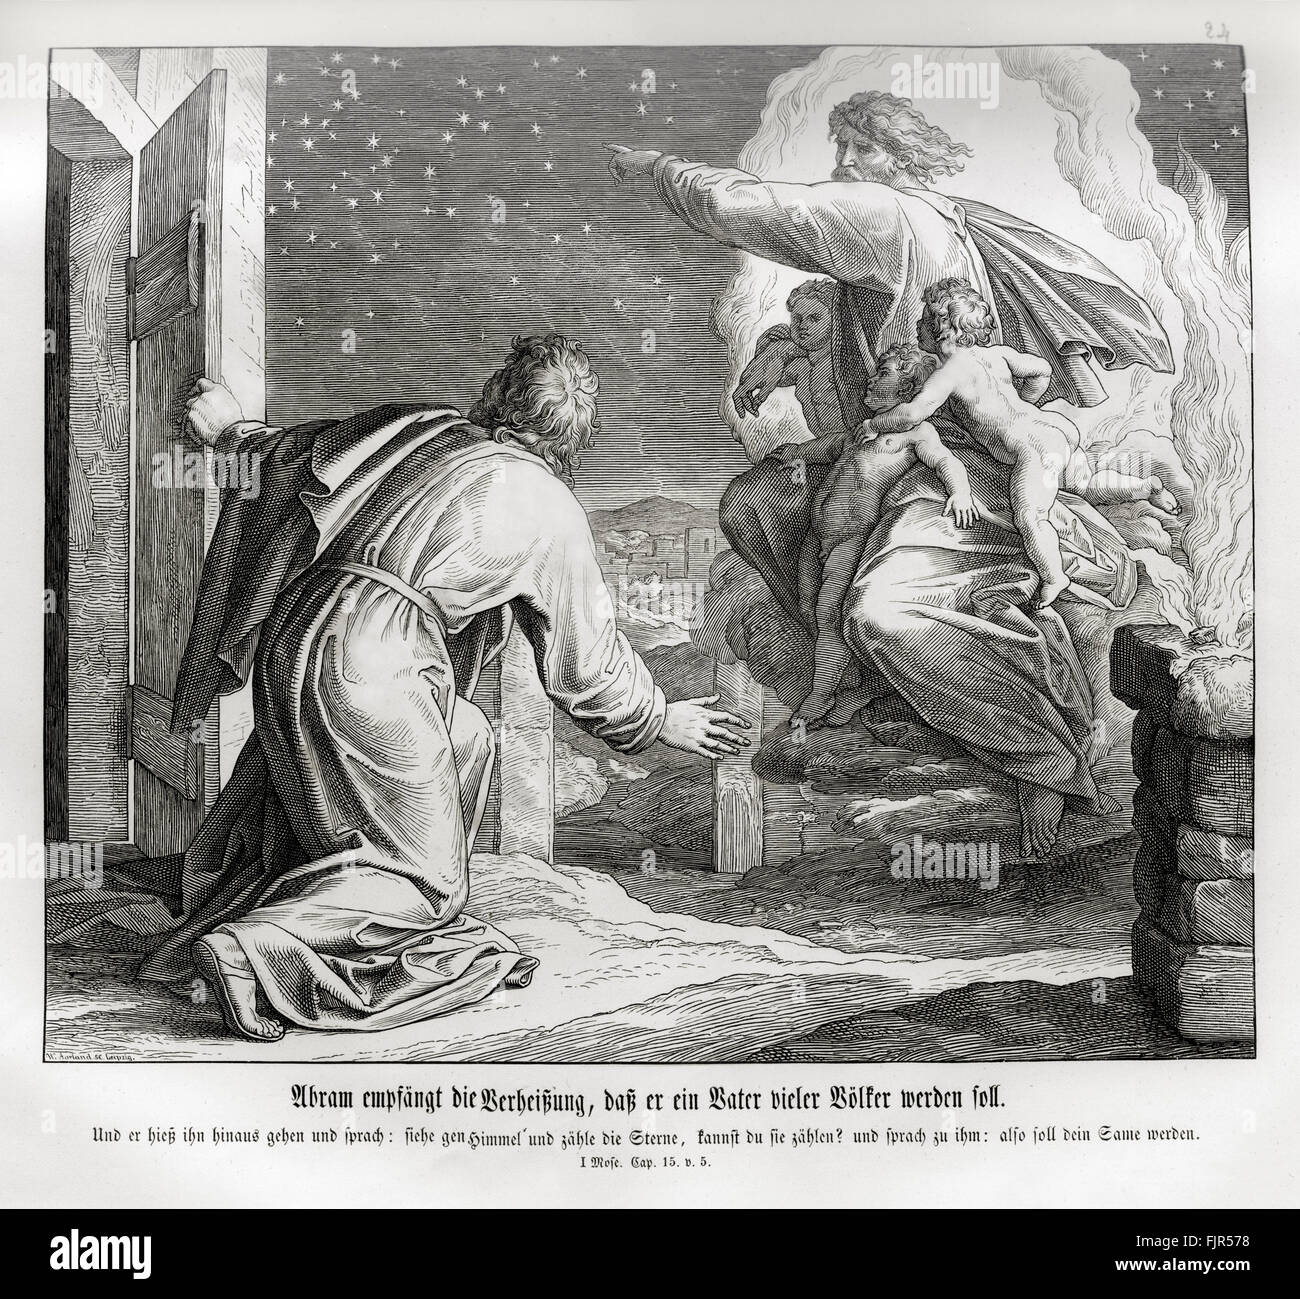 Abraham hears the prophecy that he will be father of many nations, Genesis chapter XV verse 5 'And he brought him forth abroad, and said, Look now toward heaven, and tell the stars, if thou be able to number them: and he said unto him, So shall thy seed be.' 1852-60 illustration by Julius Schnorr von Carolsfeld Stock Photo